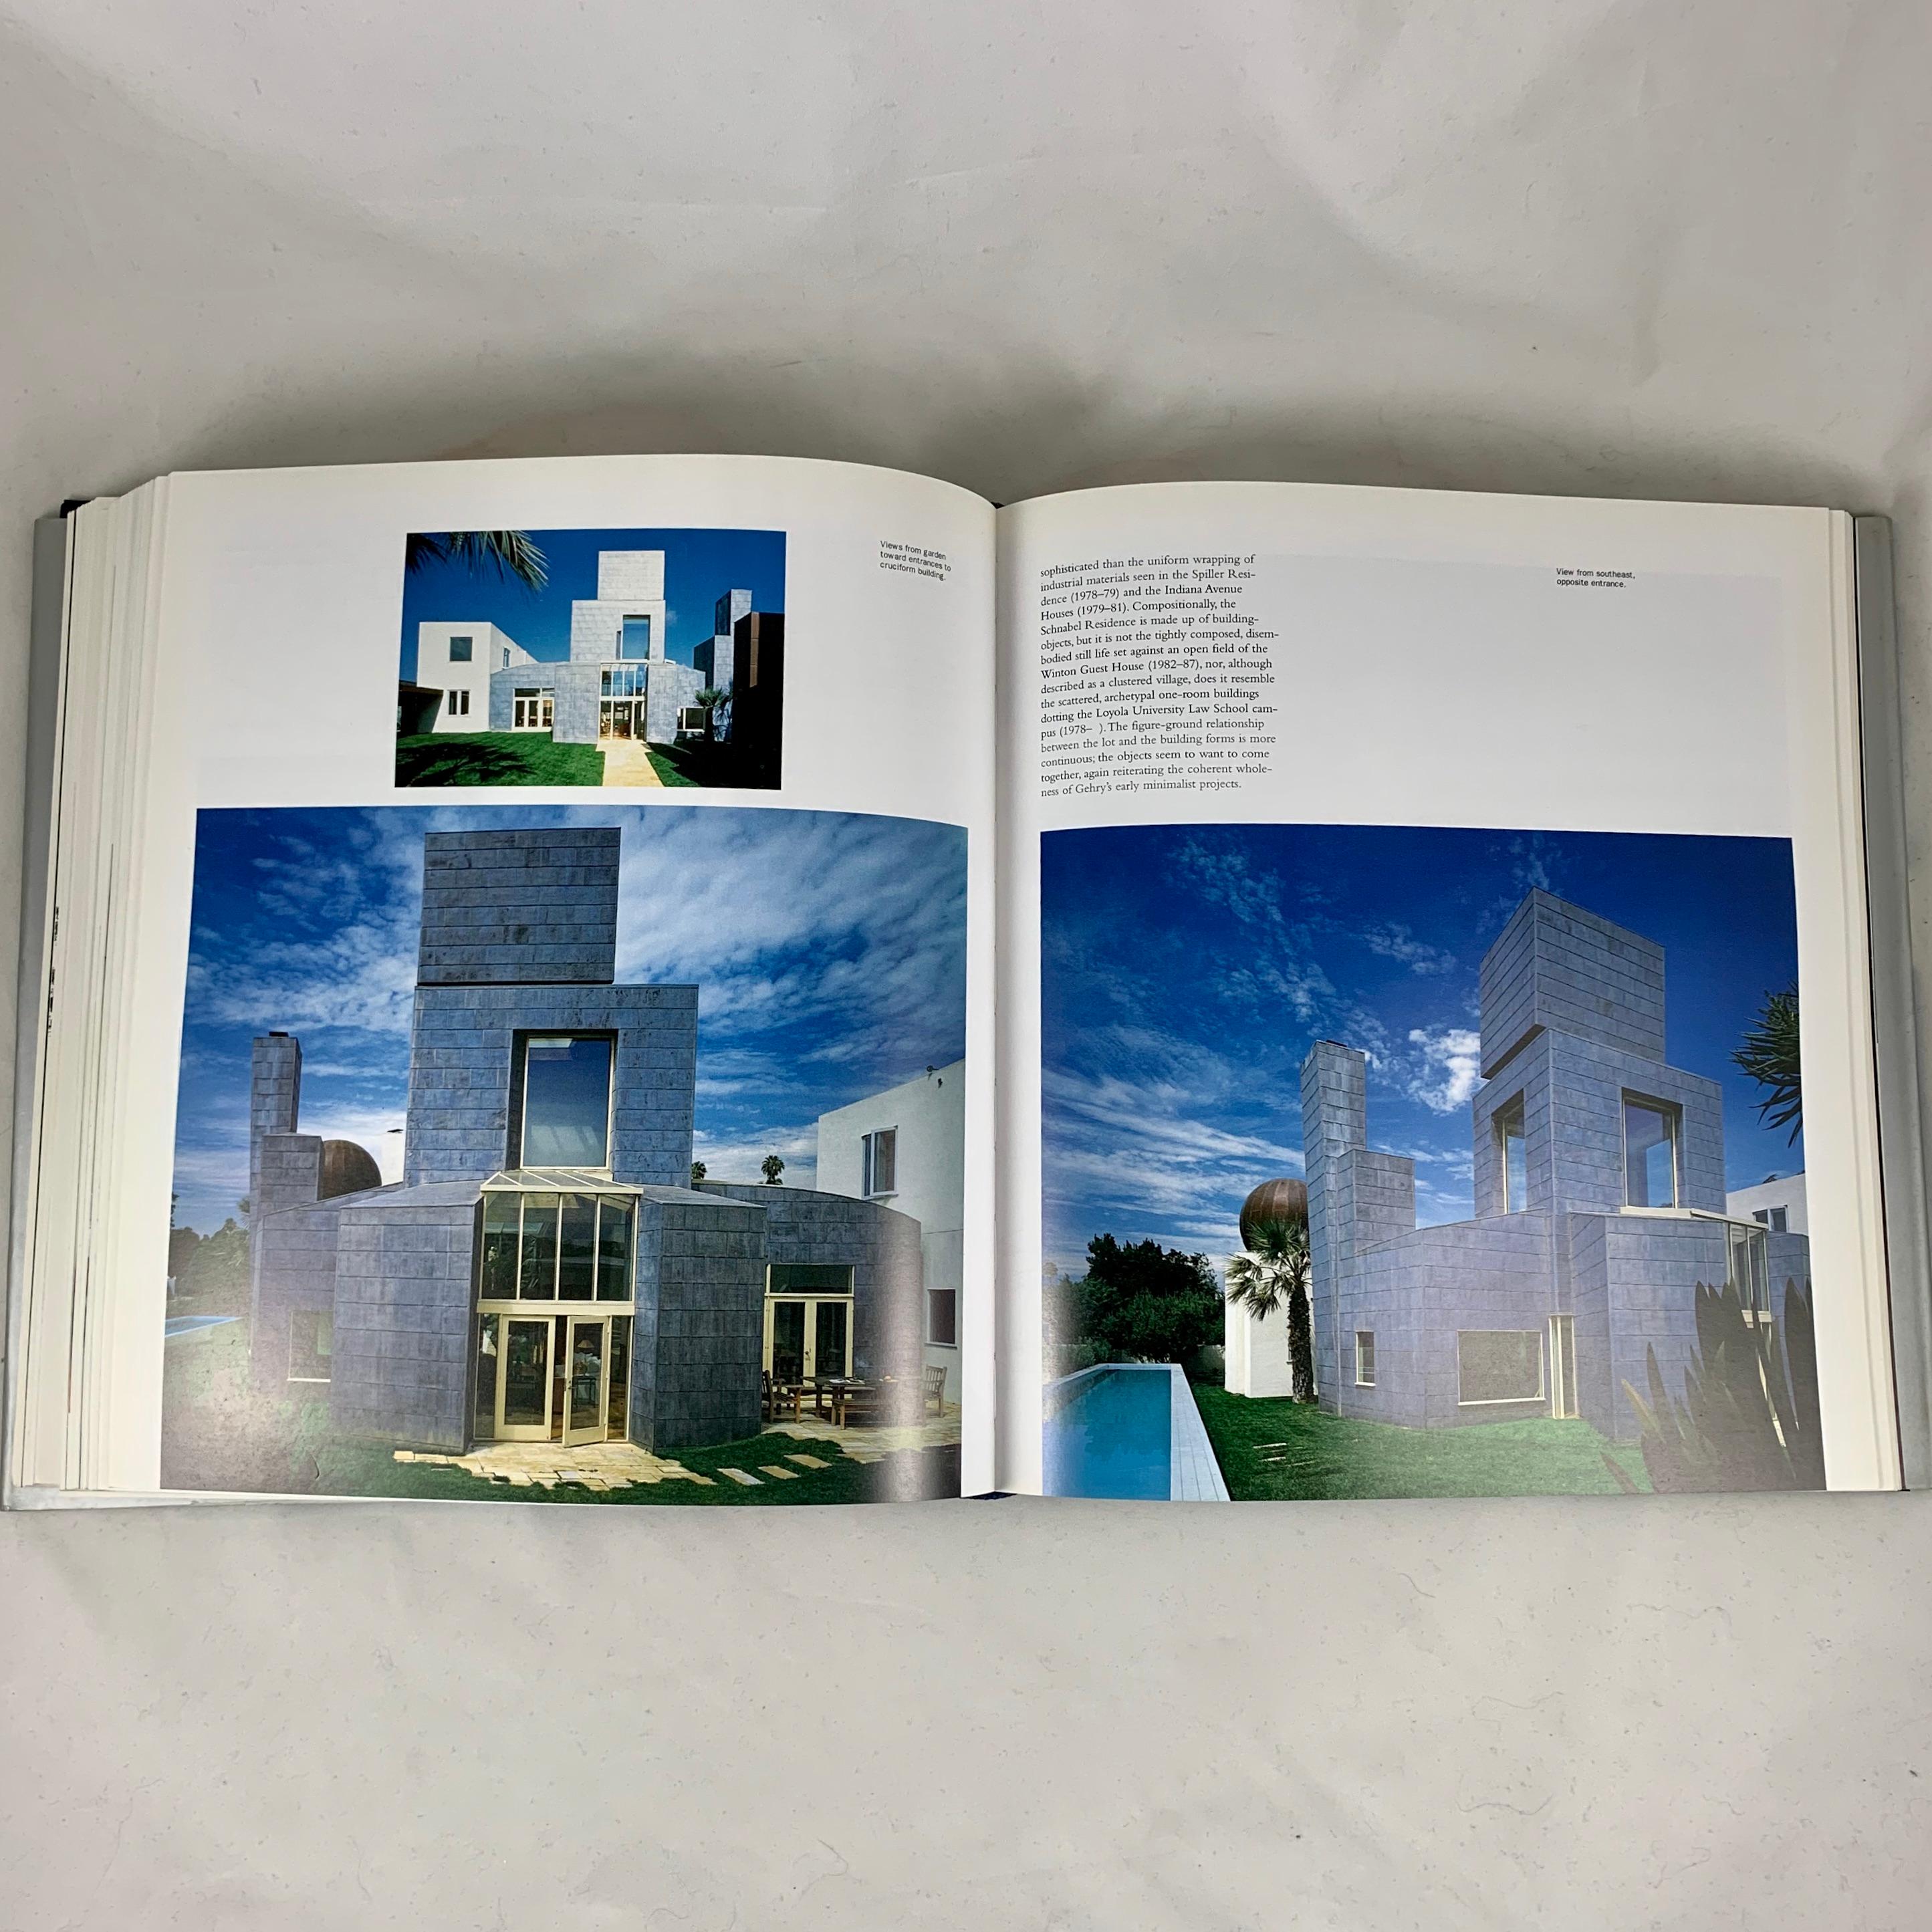 American Frank O Gehry, The Complete Works by Francesco Dal Co. Modern Architecture Book For Sale